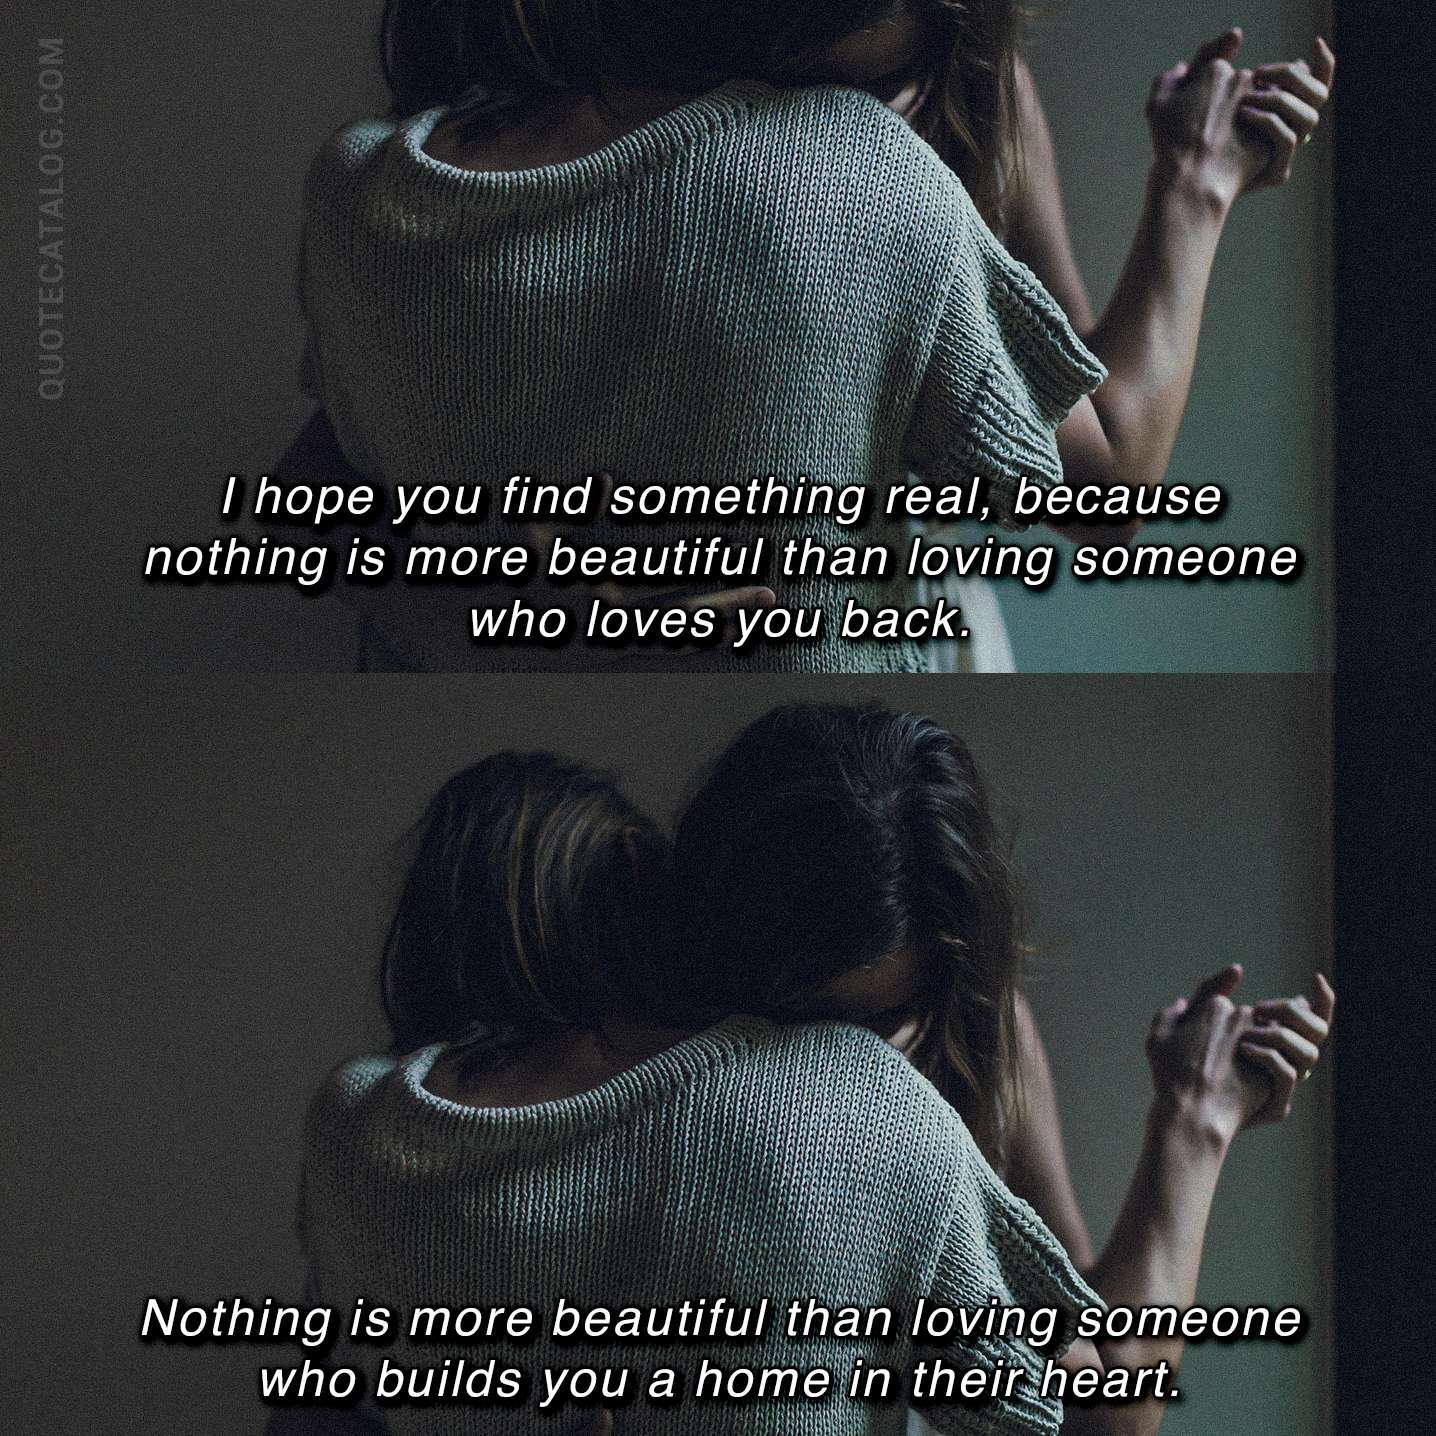 I hope you find something real because nothing is more beautiful than loving someone who